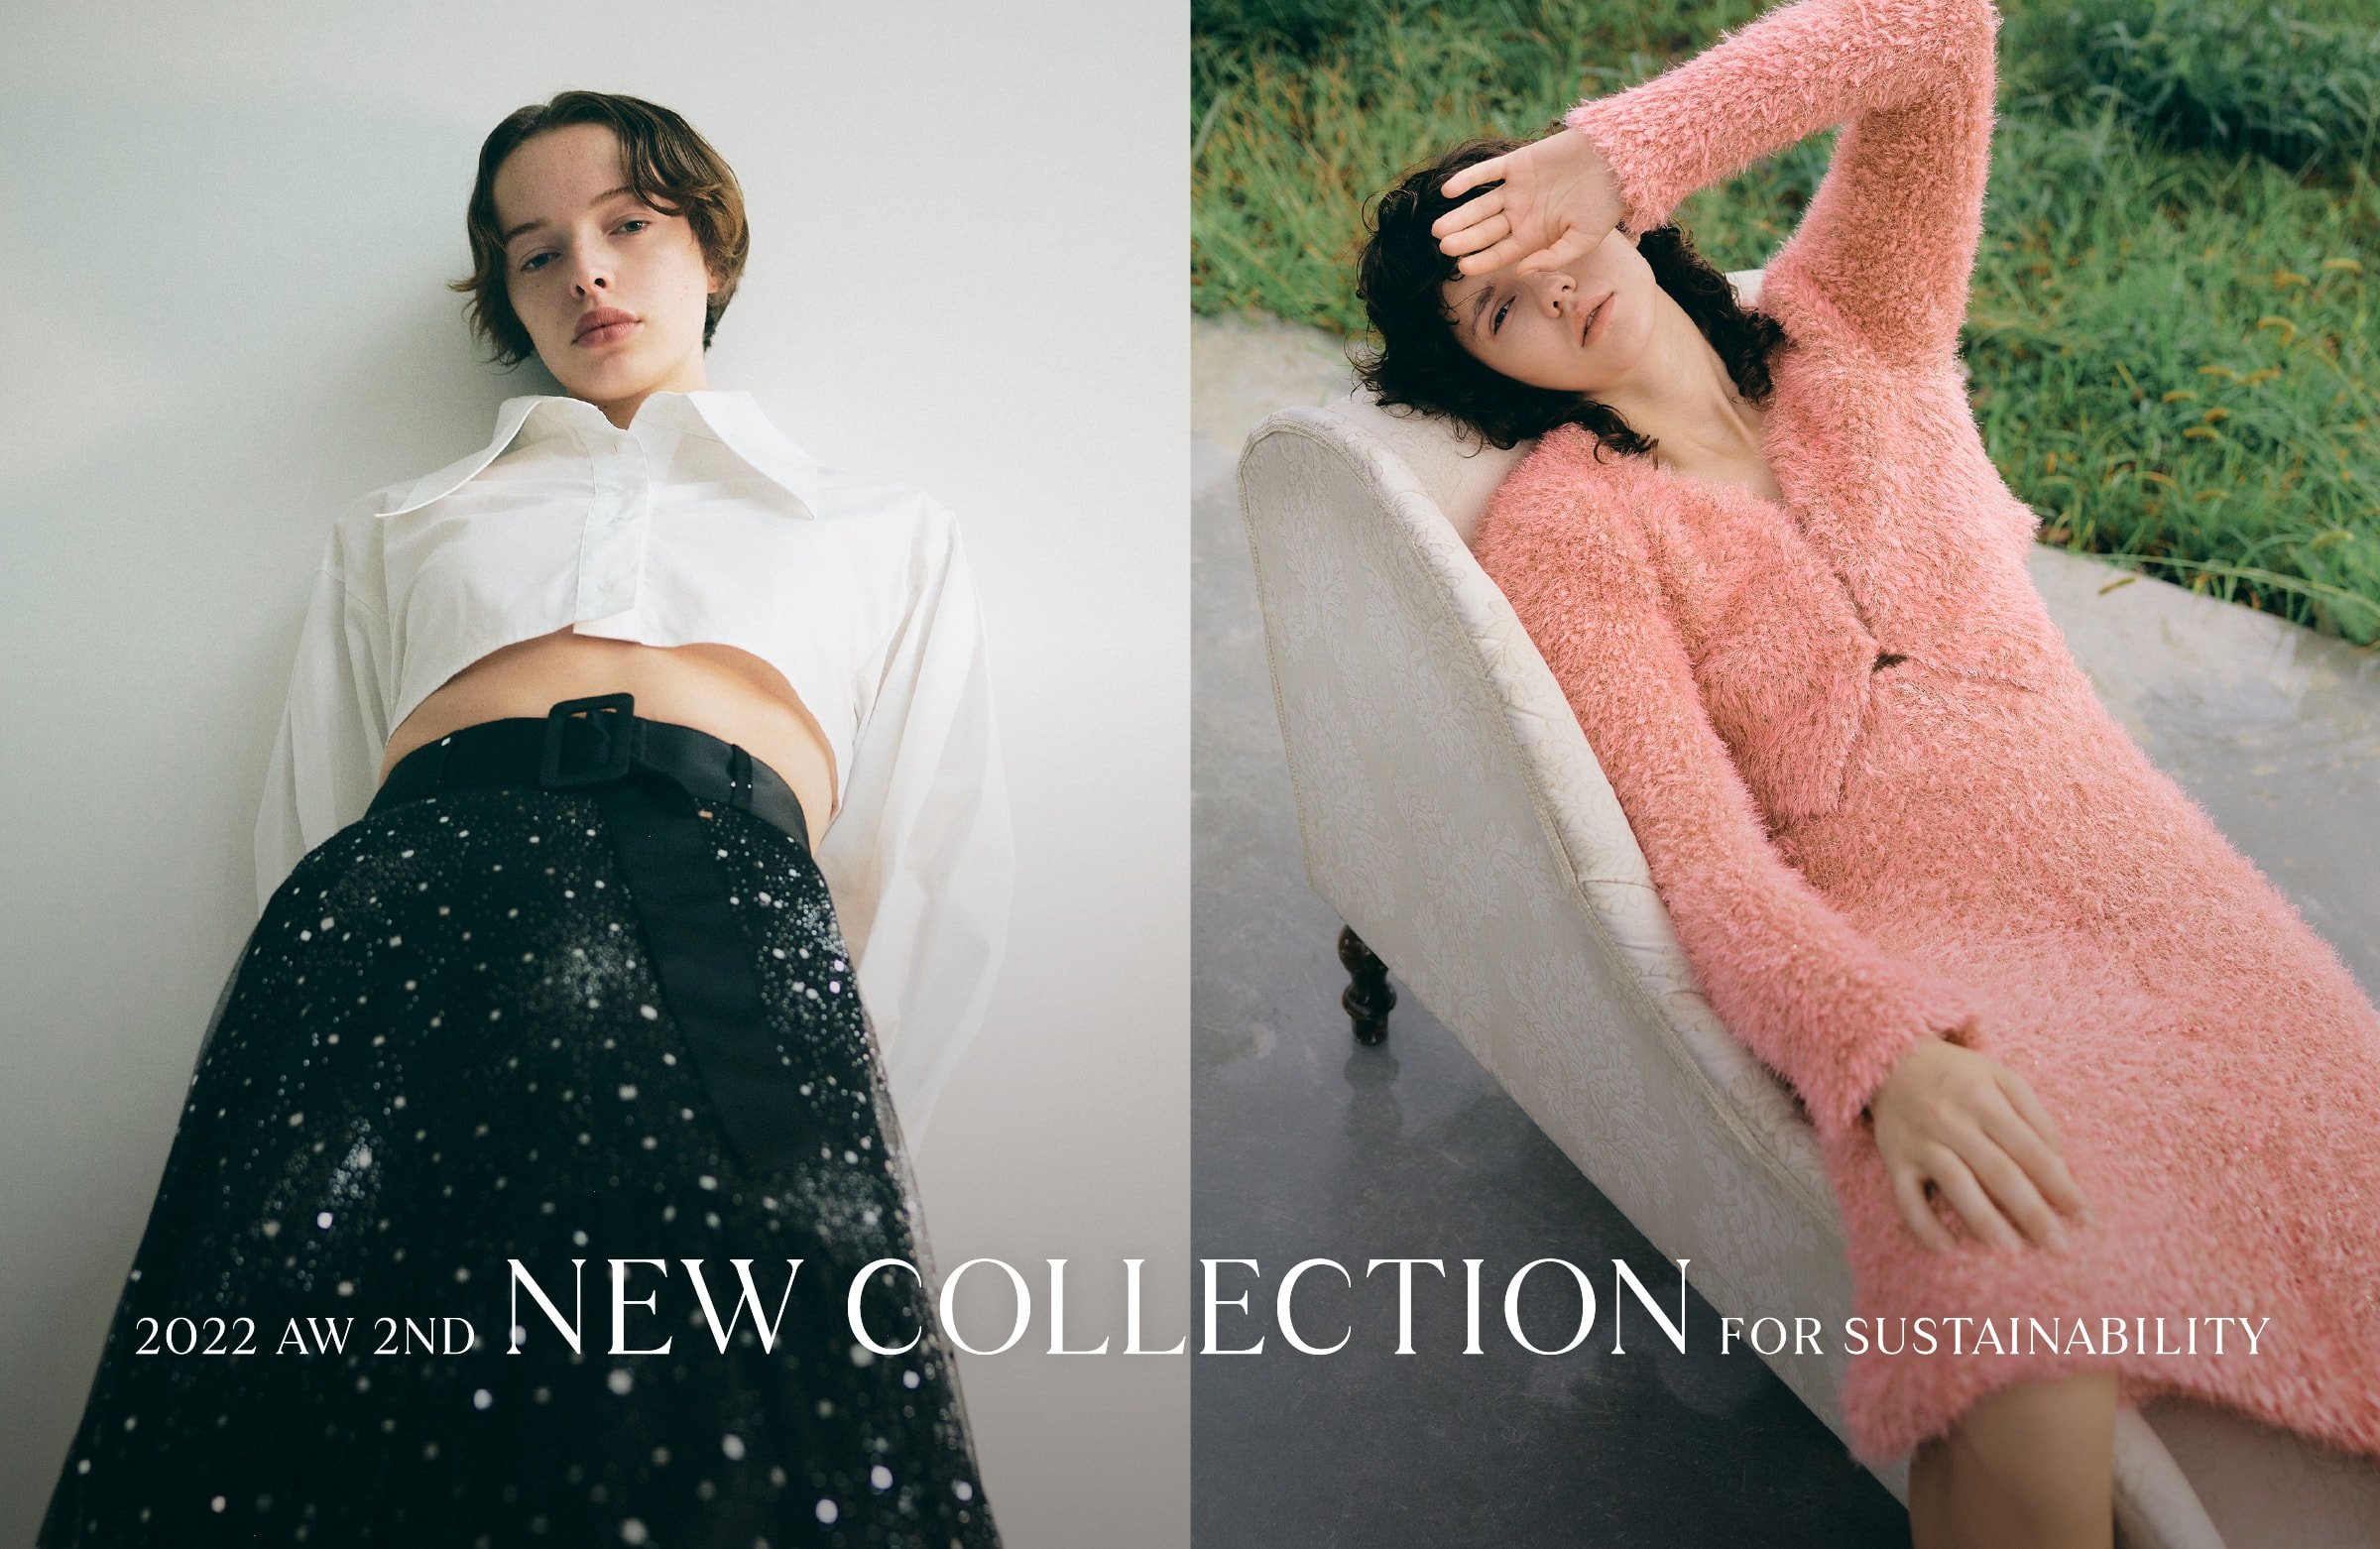 2022 AW 2ND NEW COLLECTION FOR SUSTAINABILITY